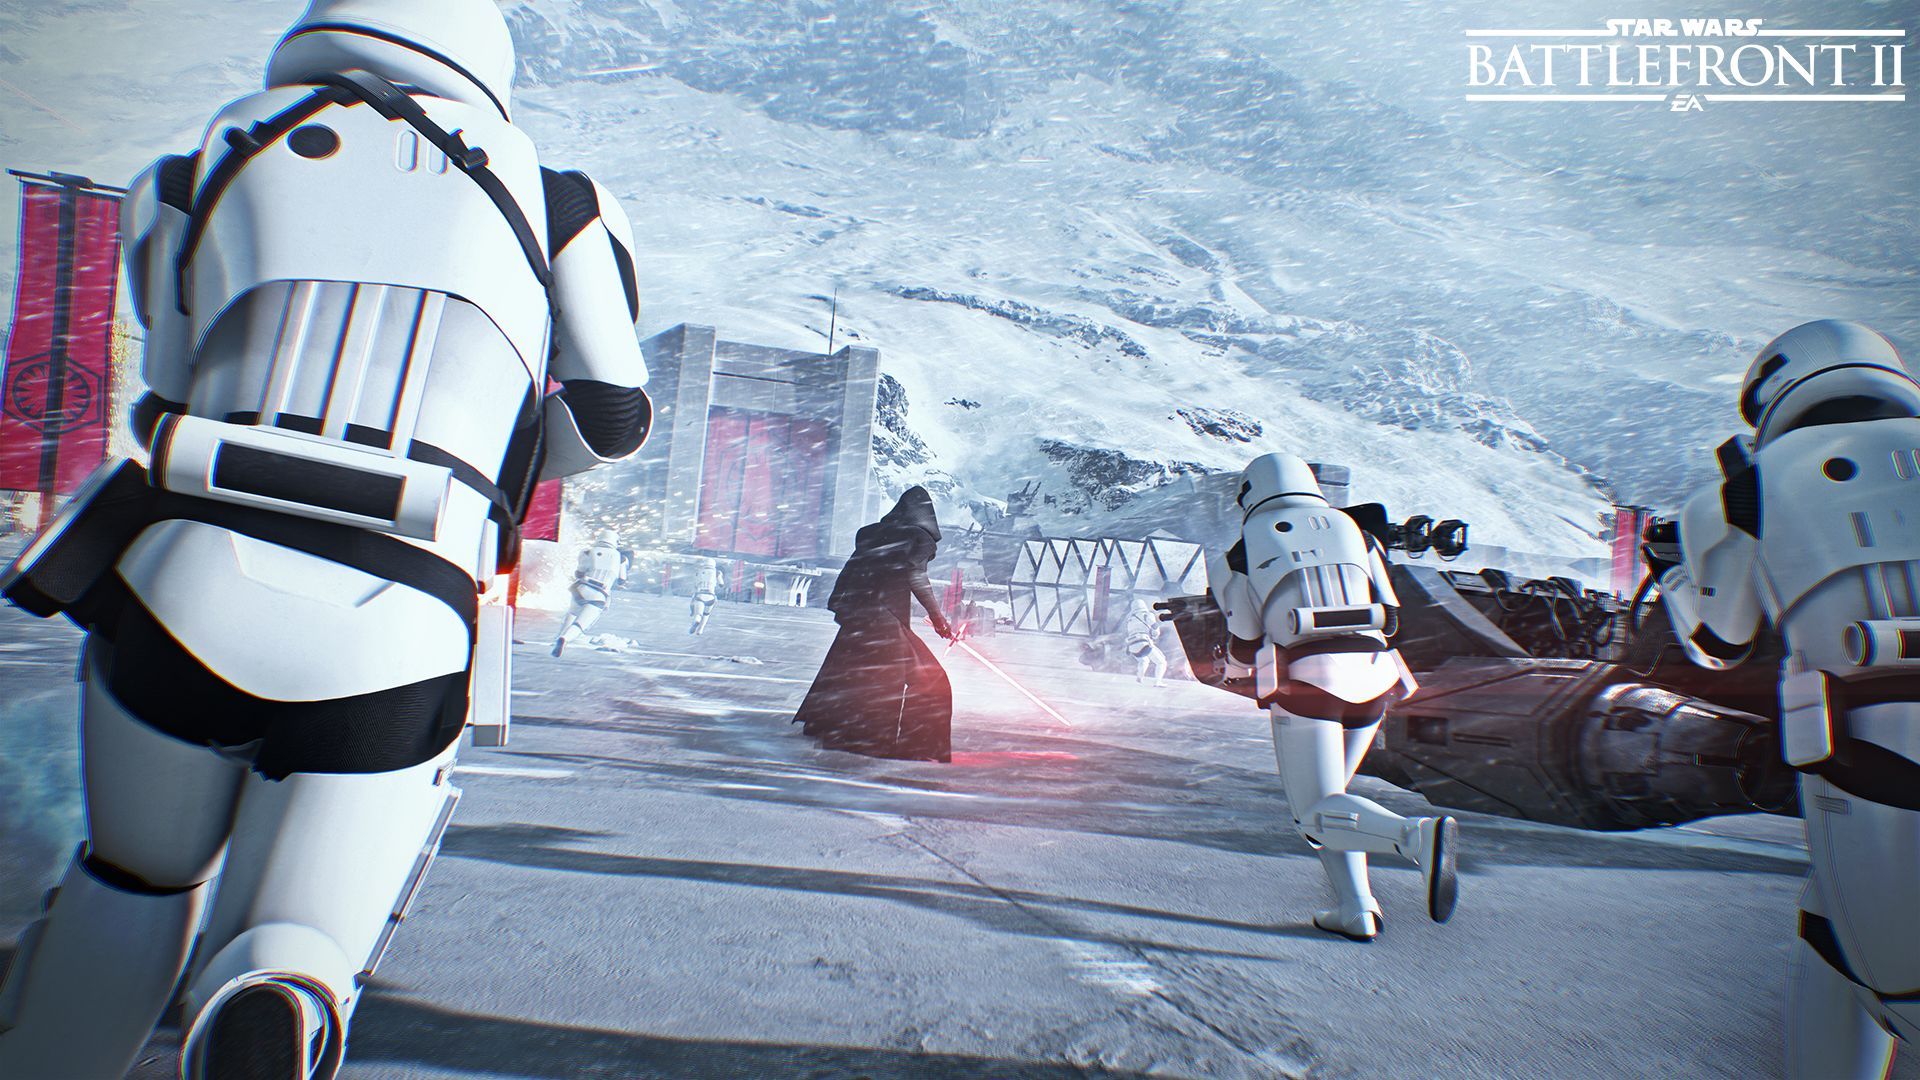 First Details For Star Wars Battlefront Ii Arrive Space Battles And Single Player Campaign 6637